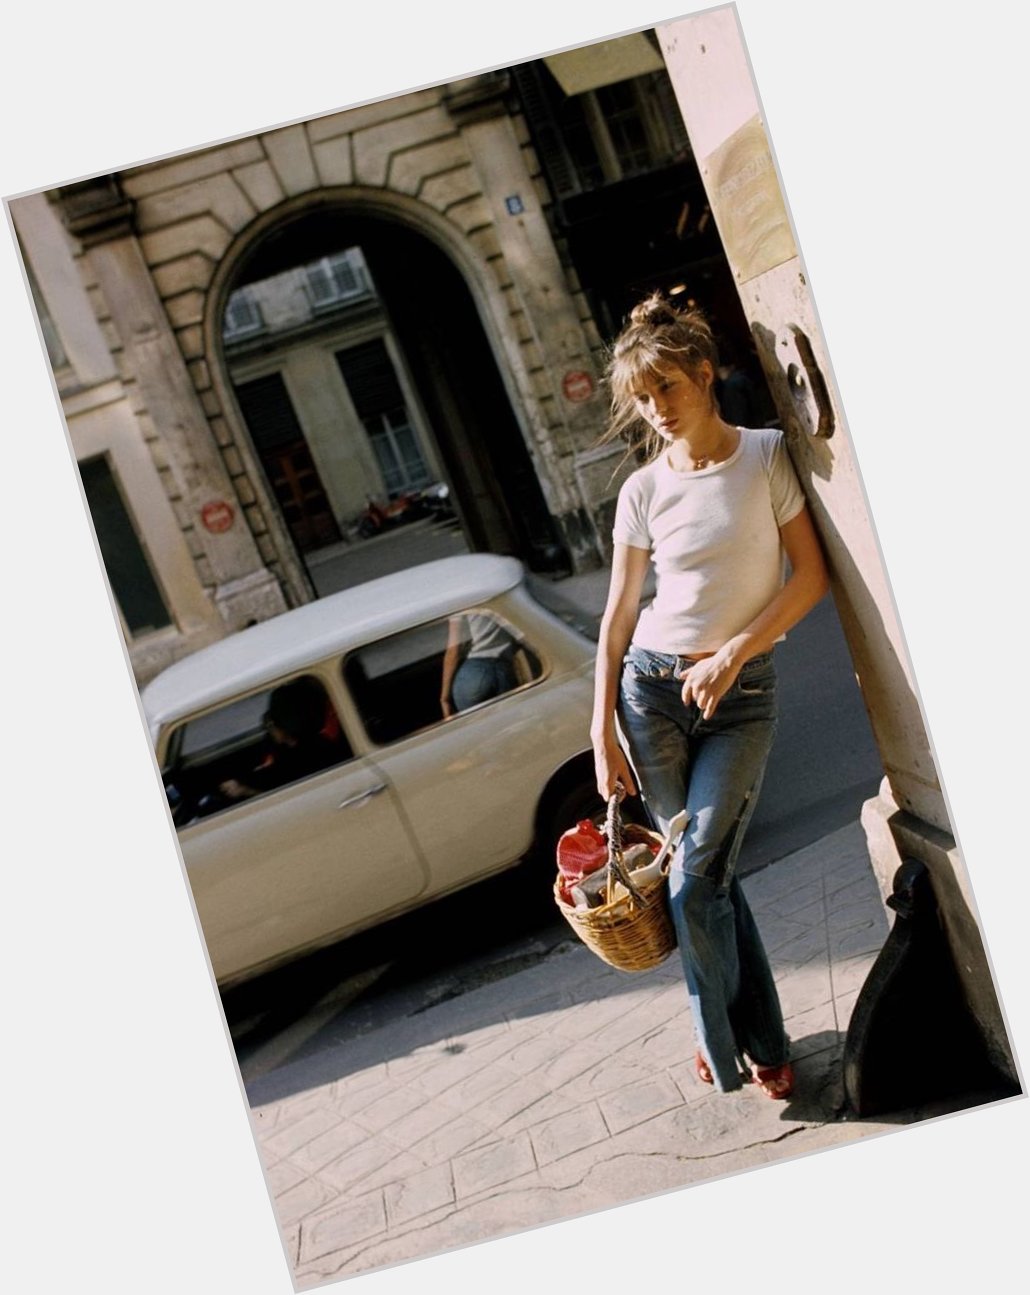 Happy birthday jane birkin, her style to this day is still recreated by people 